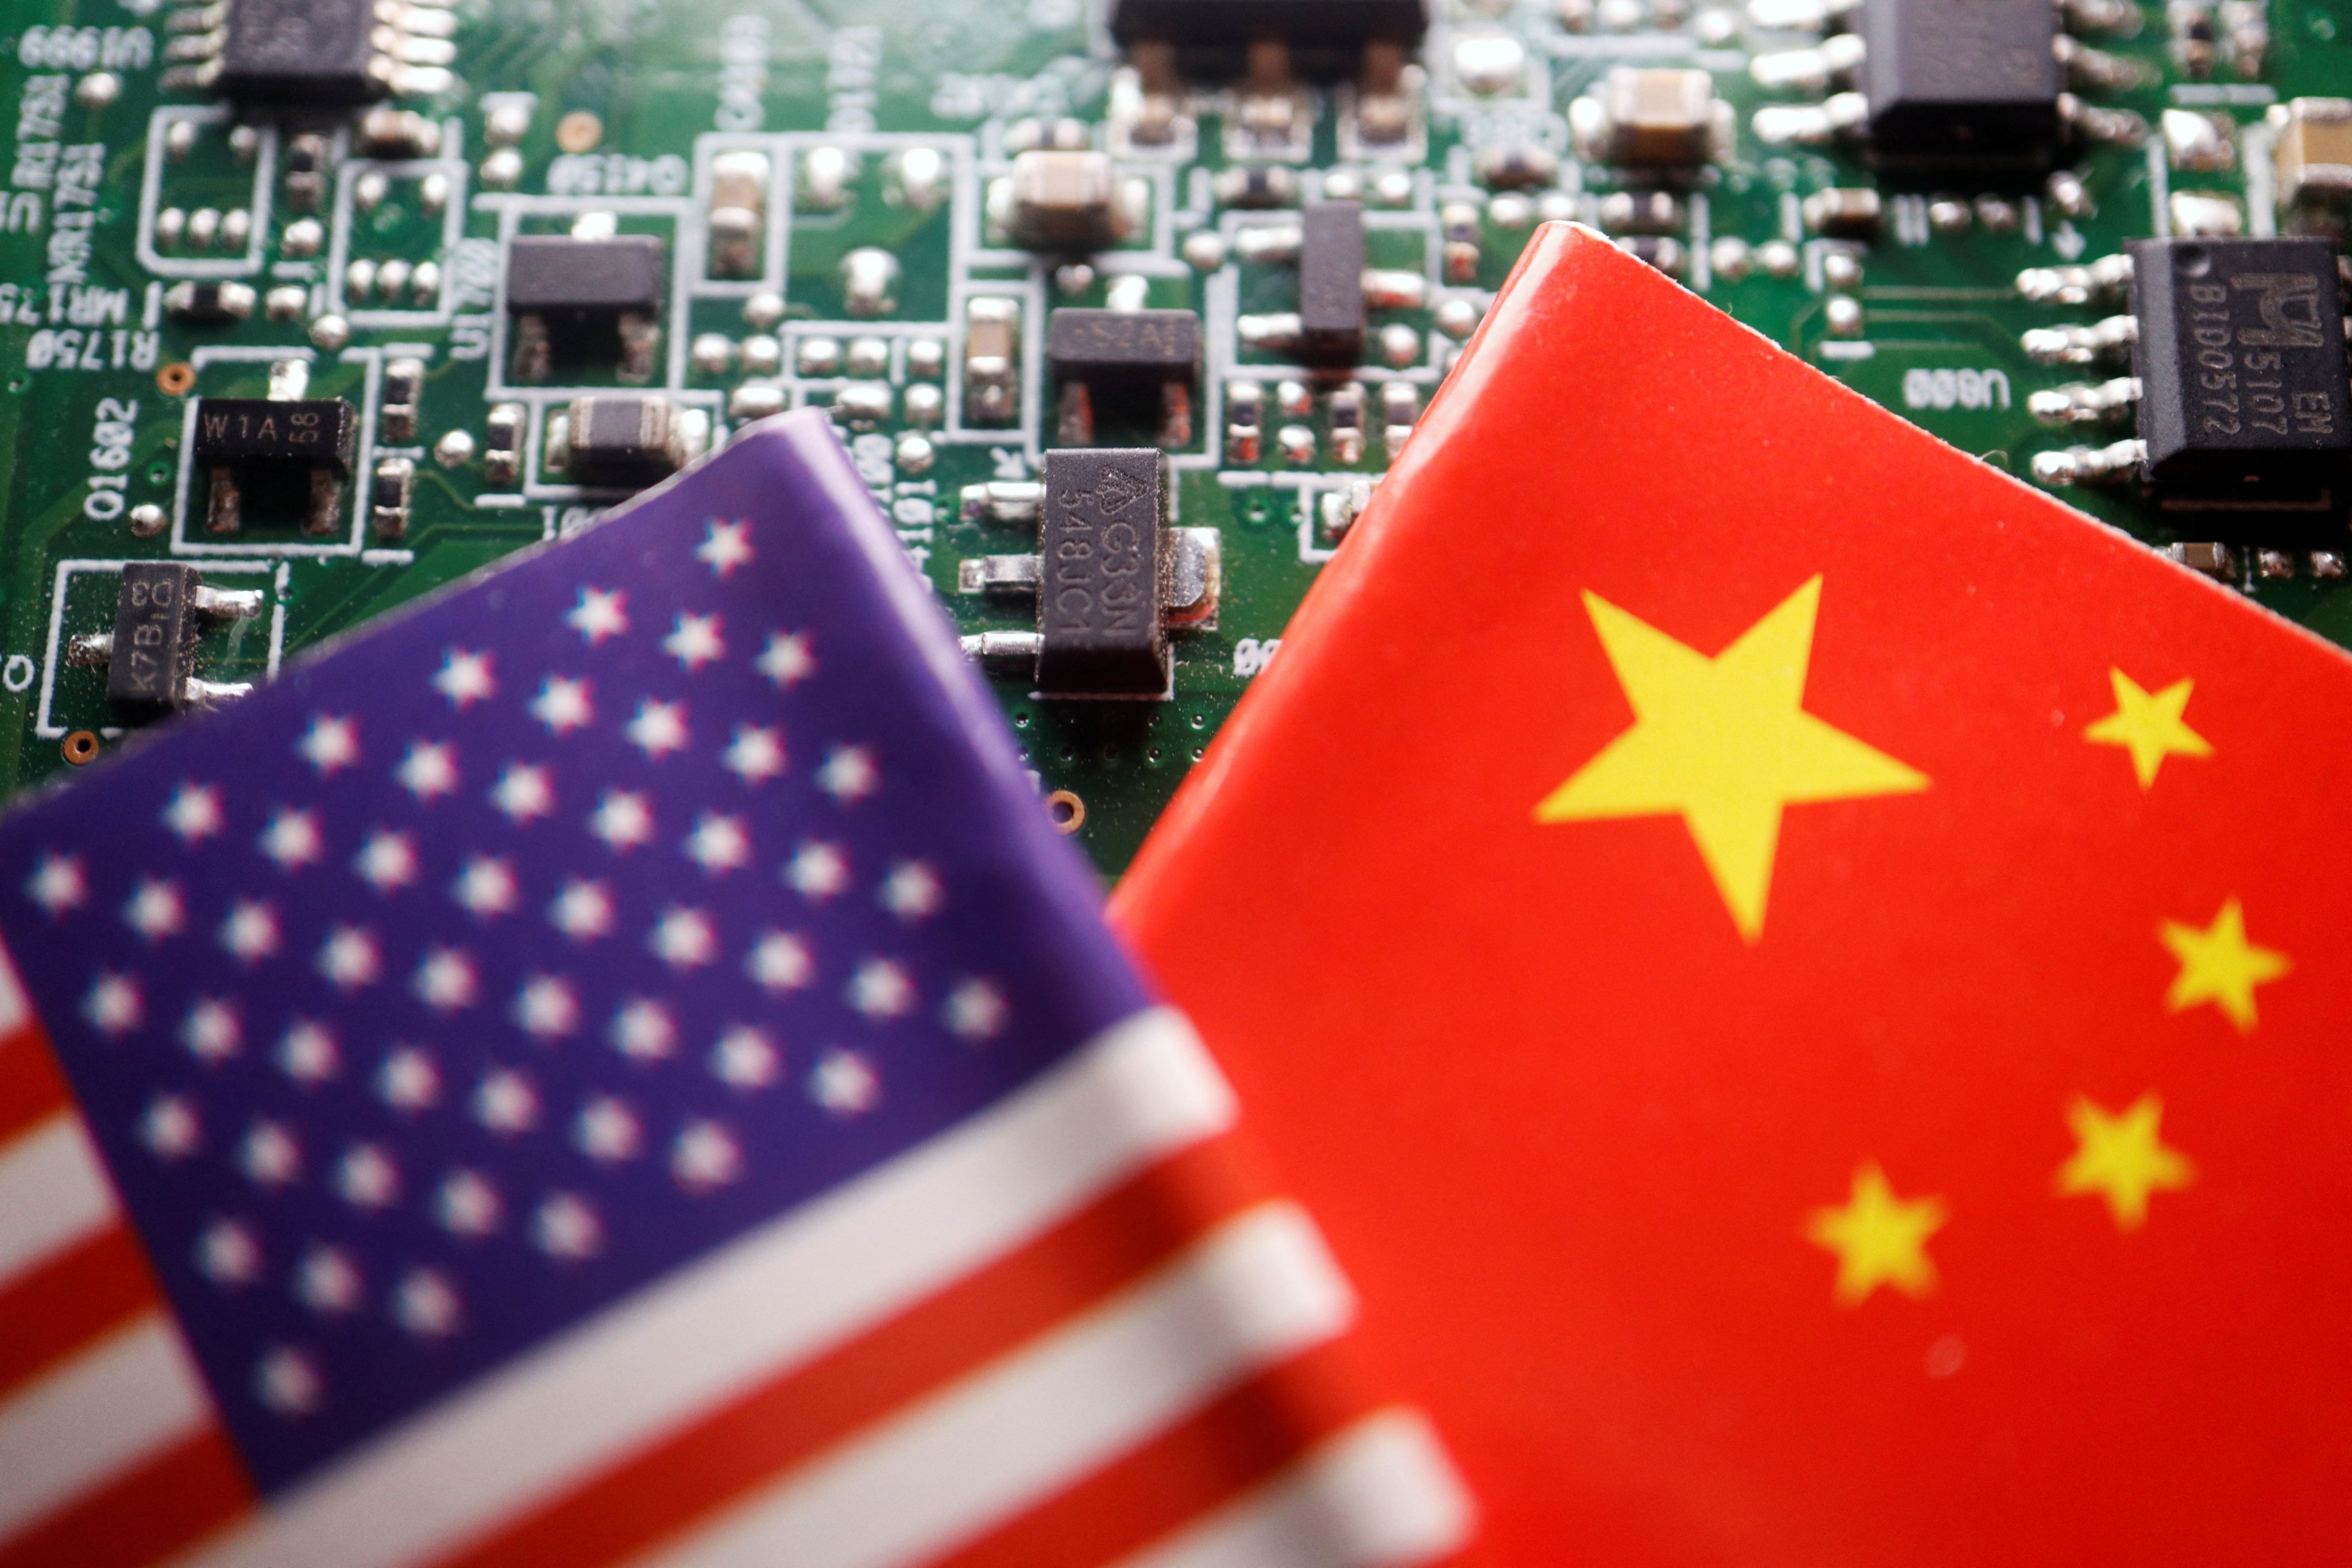 The flags of China and the US displayed on a printed circuit board with semiconductor chips. Photo: Reuters / Florence Lo / Illustration